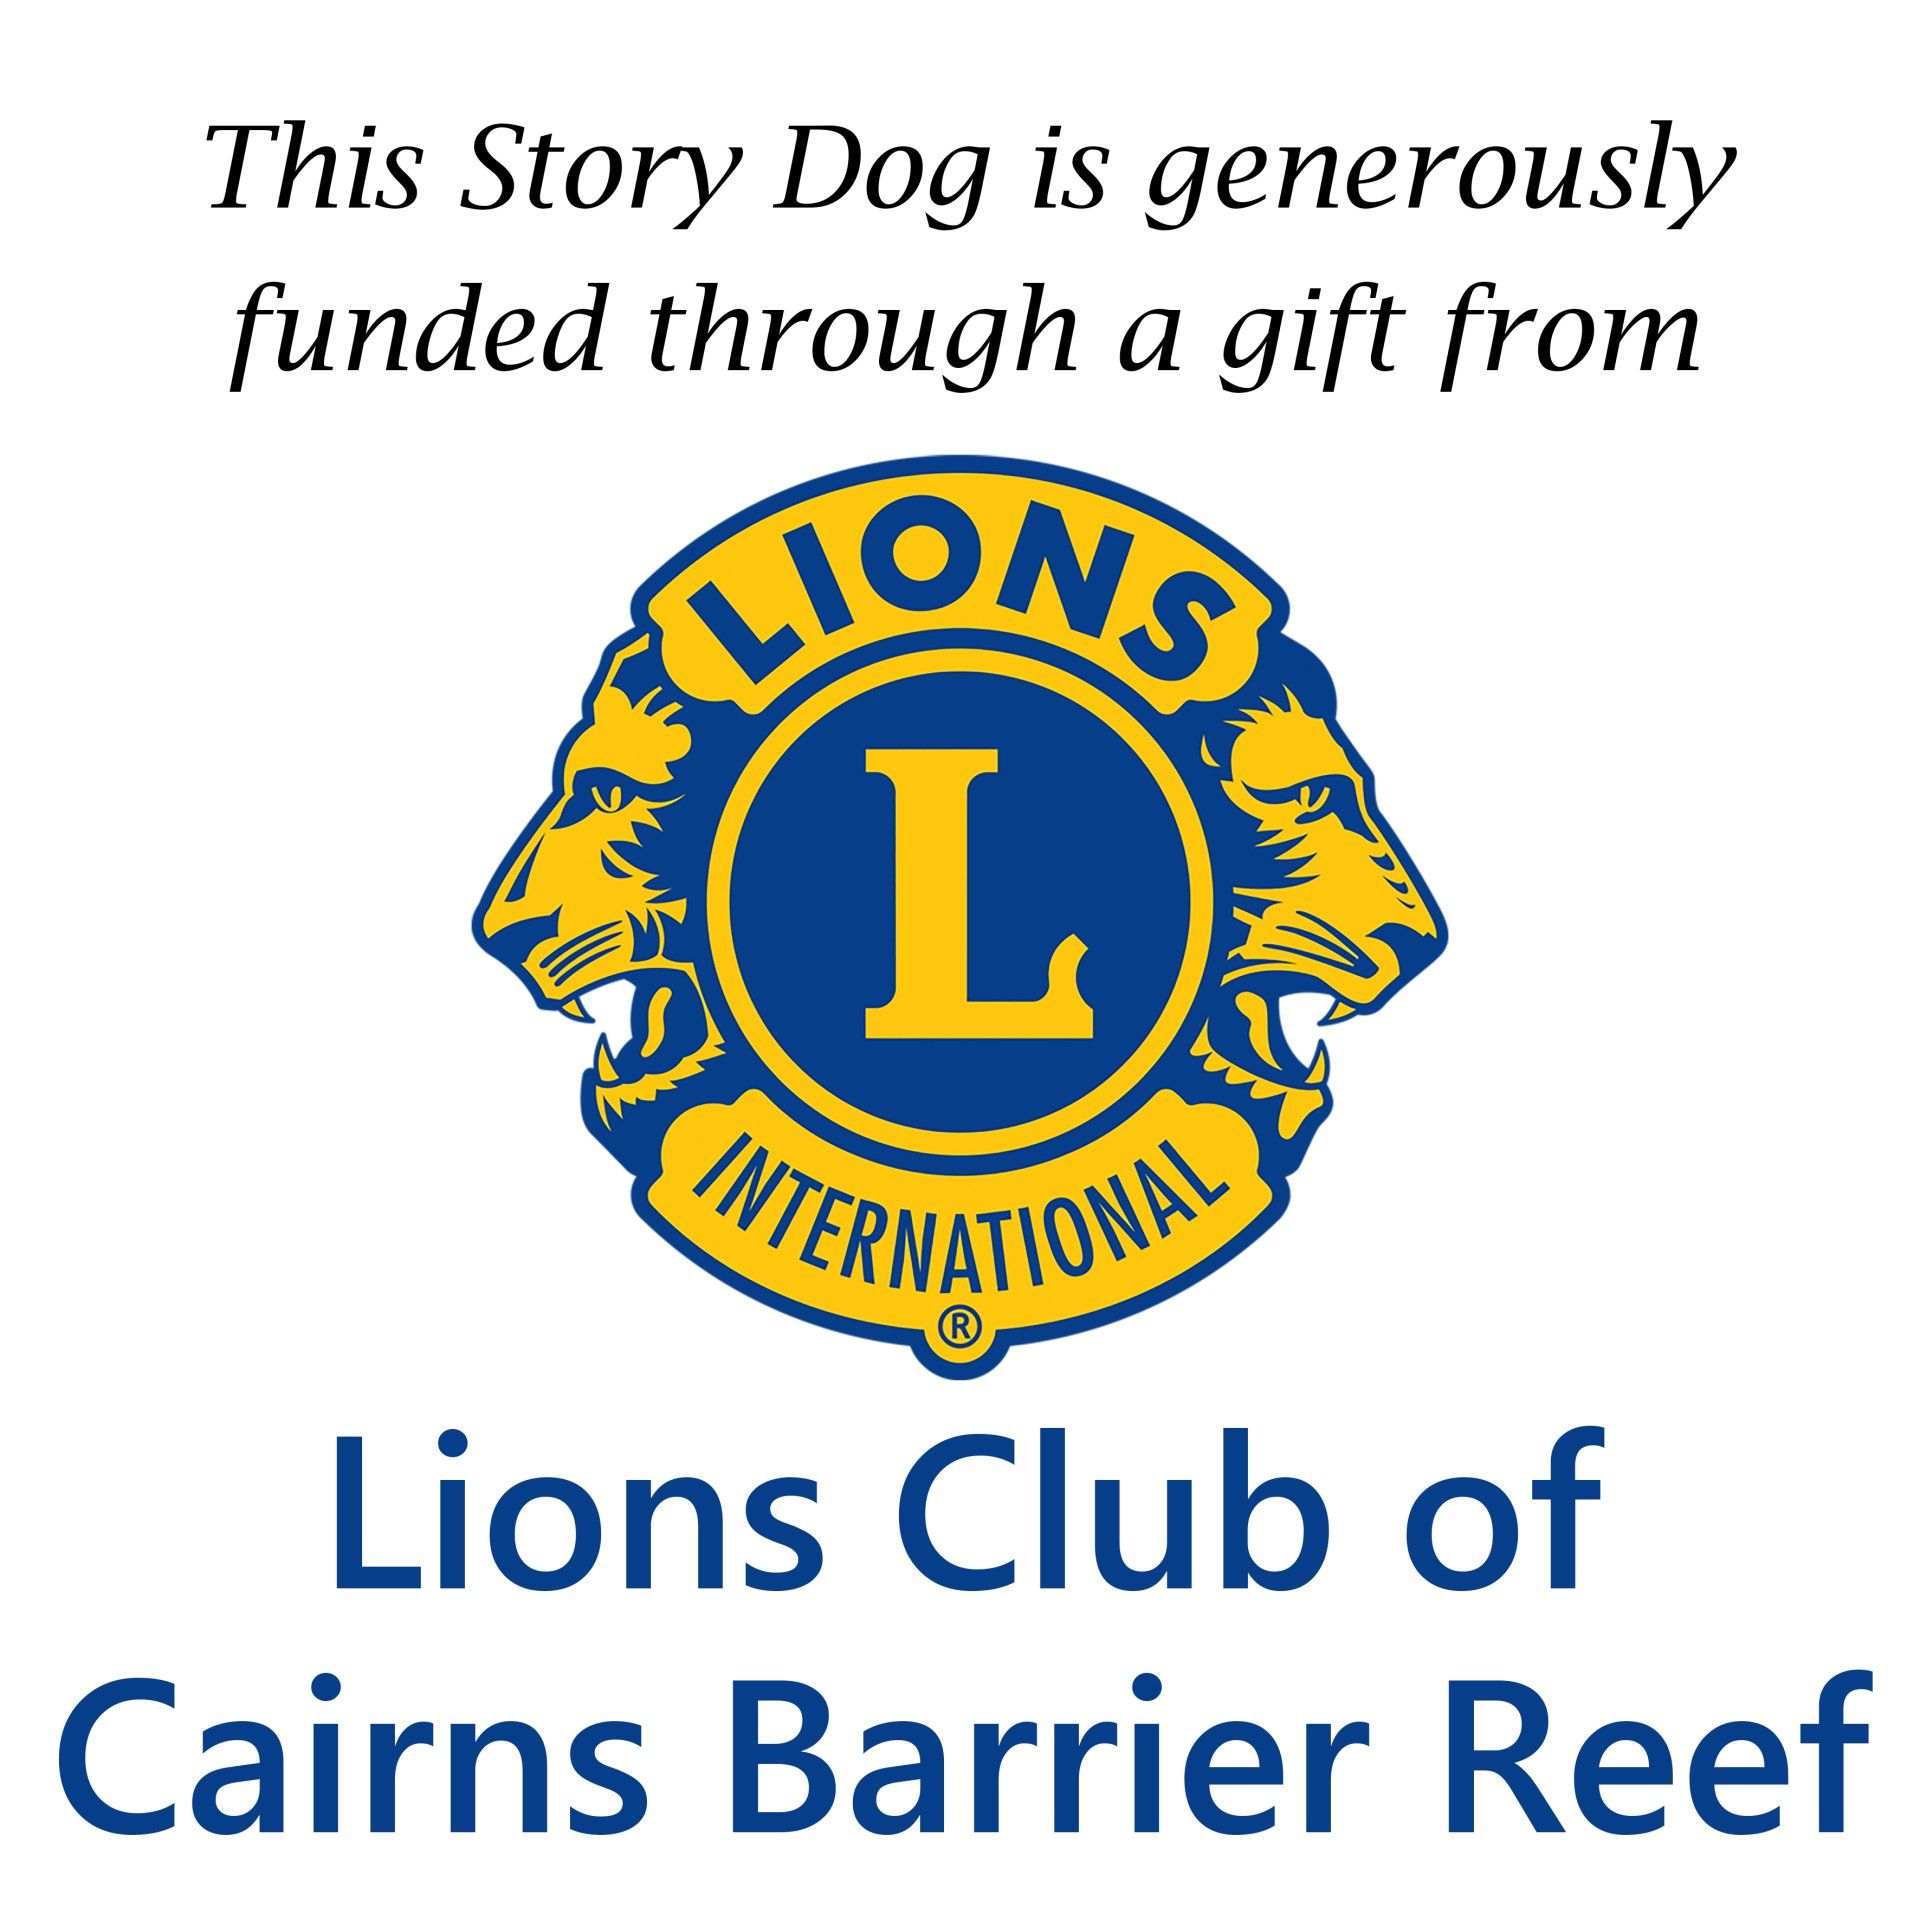 Lions Club of Cairns Barrier Reef